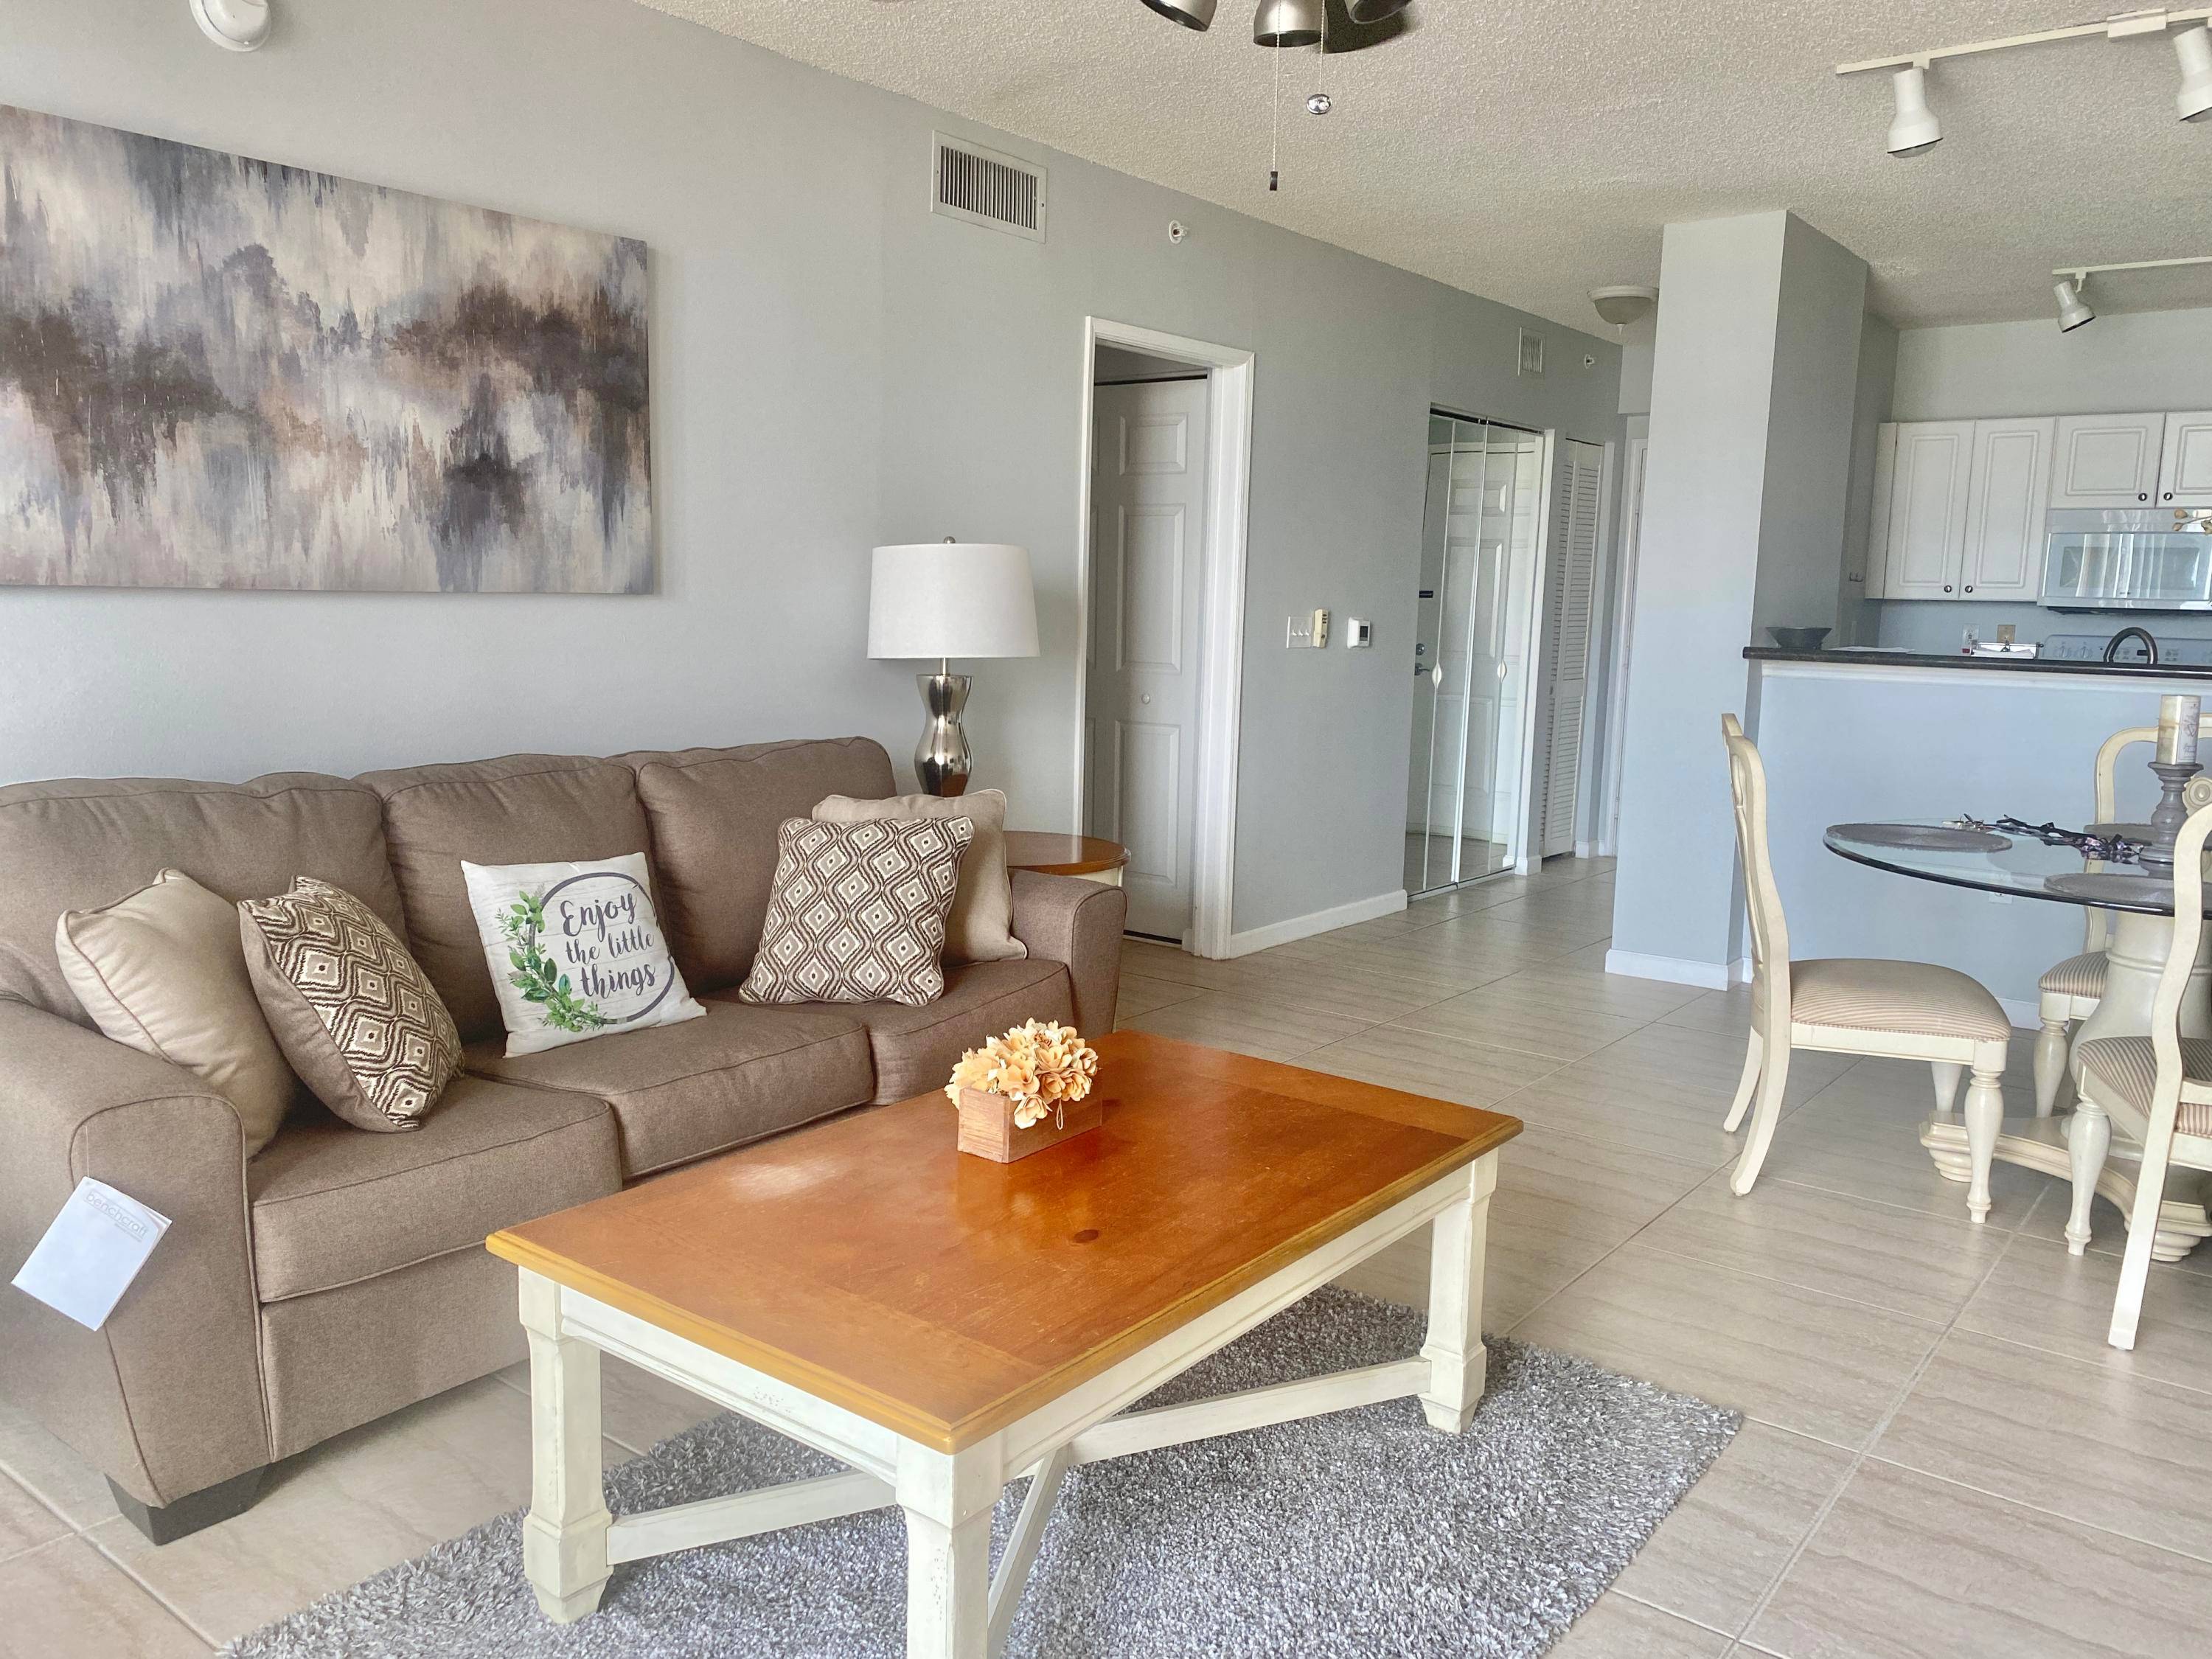 Short term Rental Bright and cozy 1 bedroom 1 bathroom fully furnished turnkey Contemporary Decor.